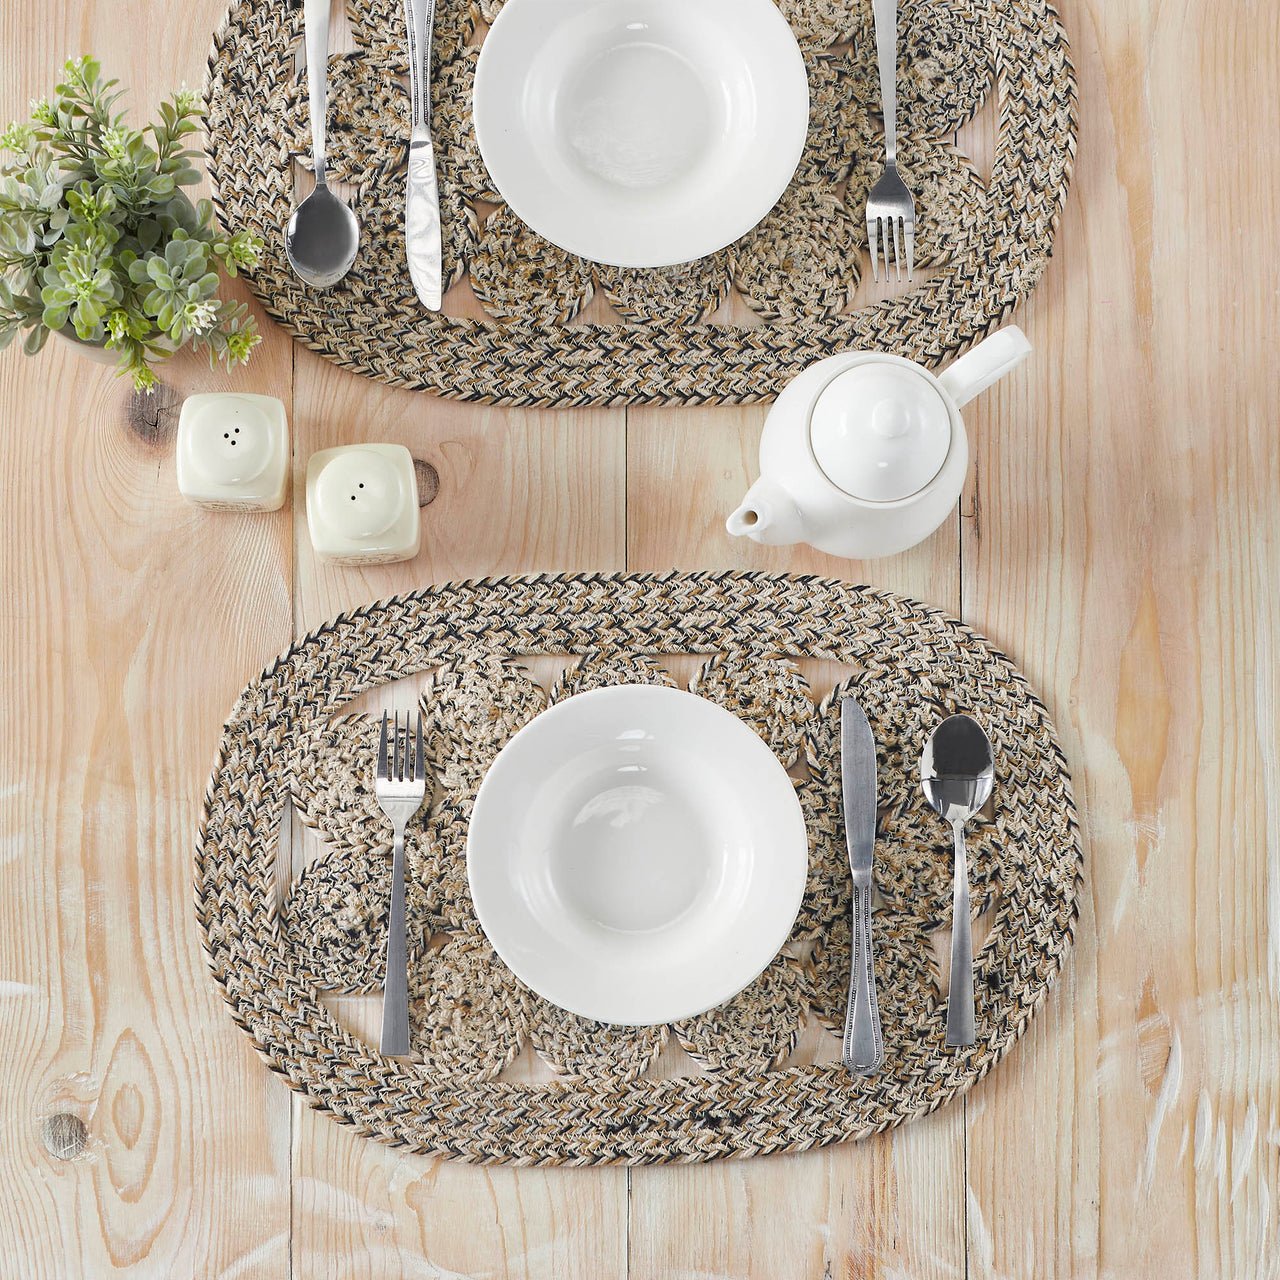 Celeste Blended Pebble Indoor/Outdoor Braided Placemat 13"x19" VHC Brands